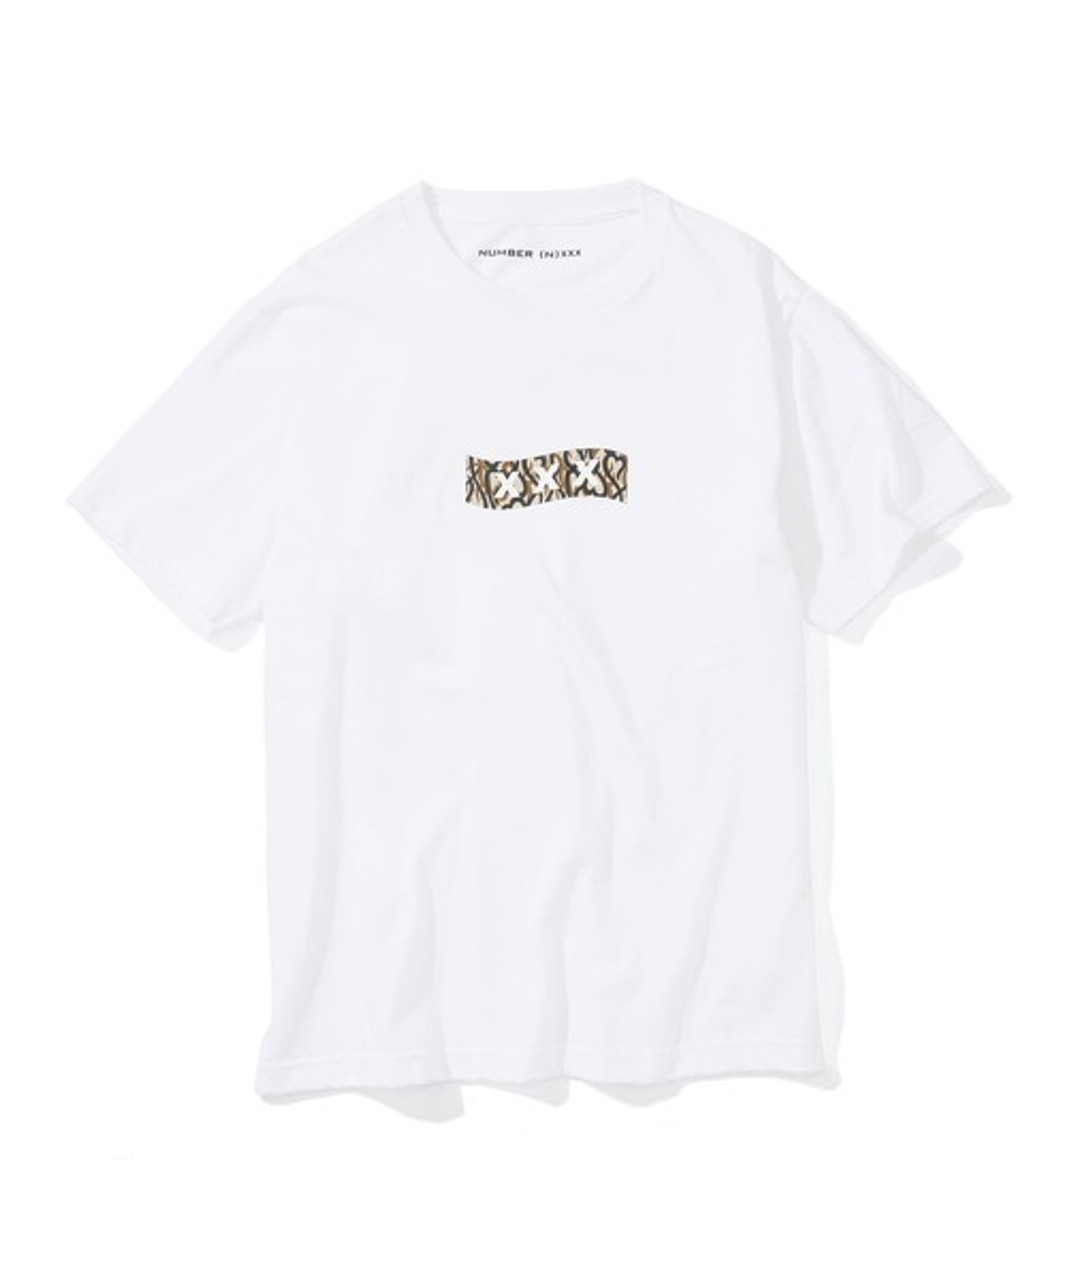 GOD SELECTION XXX × NUMBER (N) INE_T-SHIRT BJ3NXT001